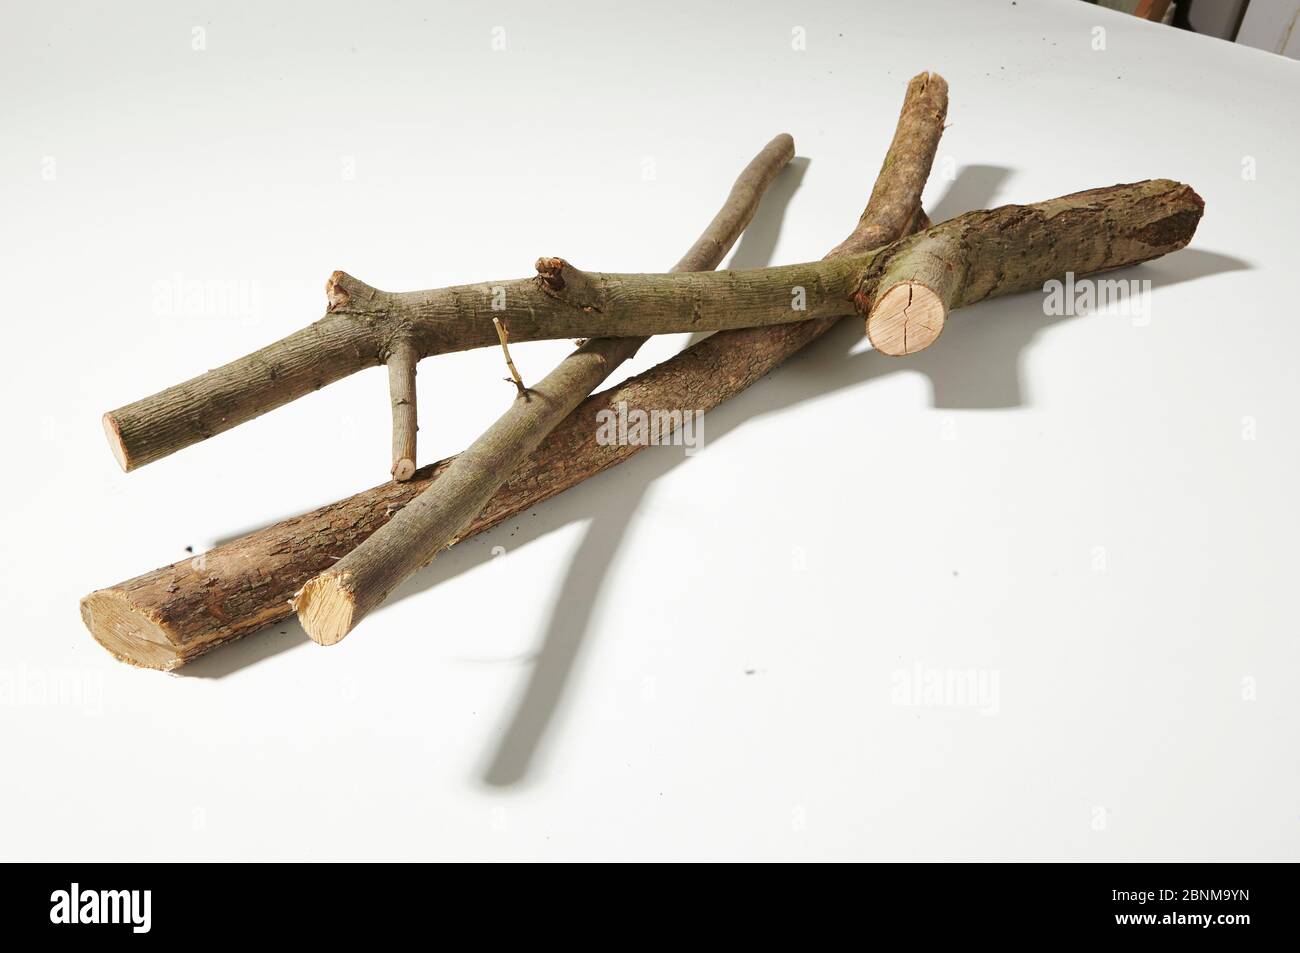 Construction of a wooden shelf, do-it-yourself production, step-by-step, material photo: sawn off branches Stock Photo